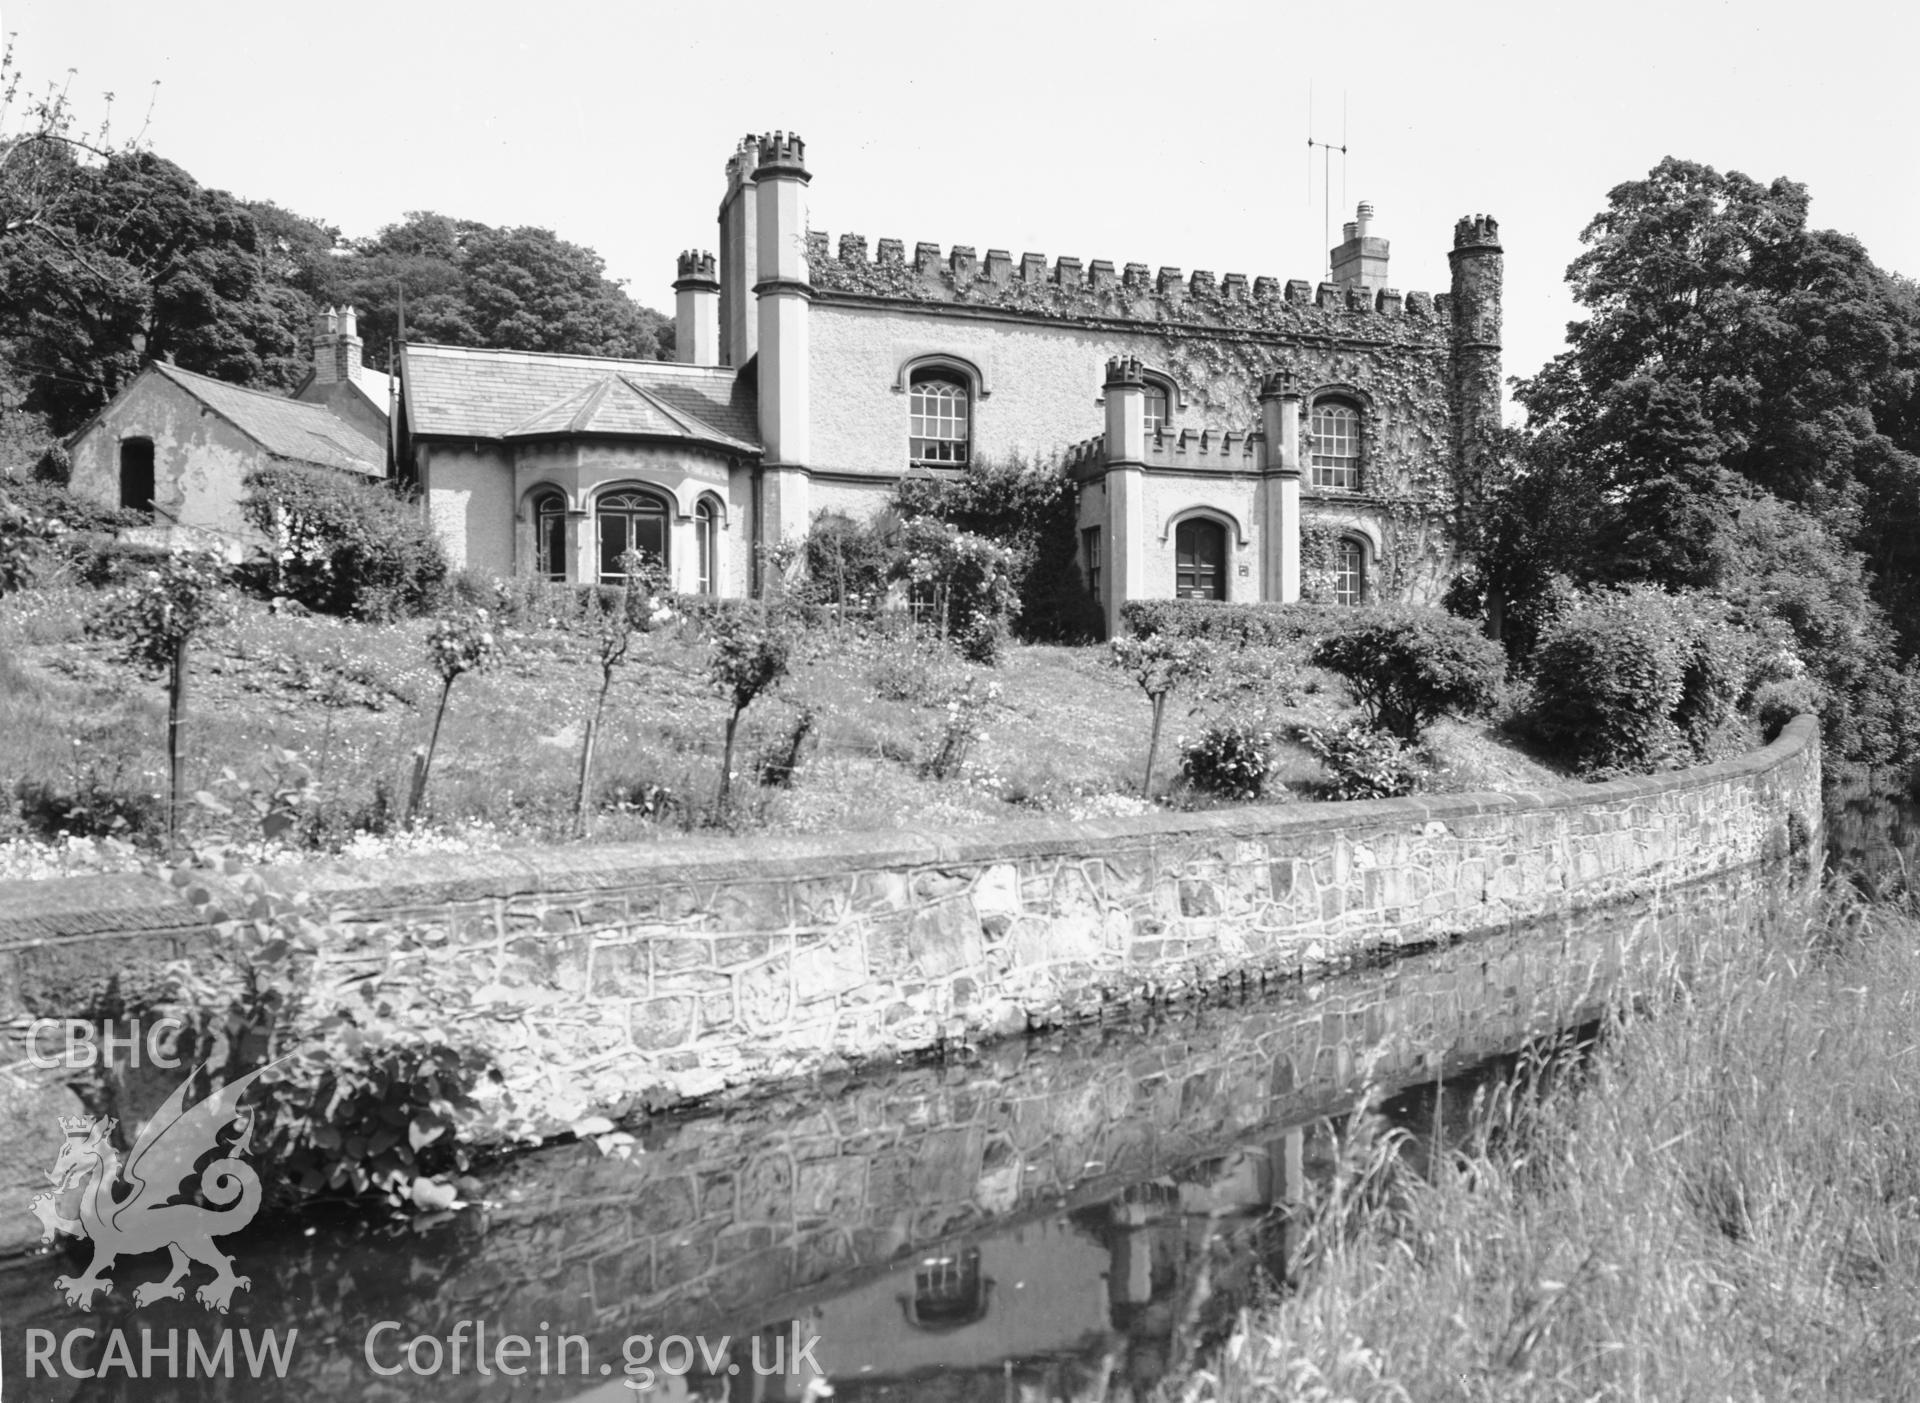 A single black and white photograph showing Siambr-wen, Llangollen.  Negative held.